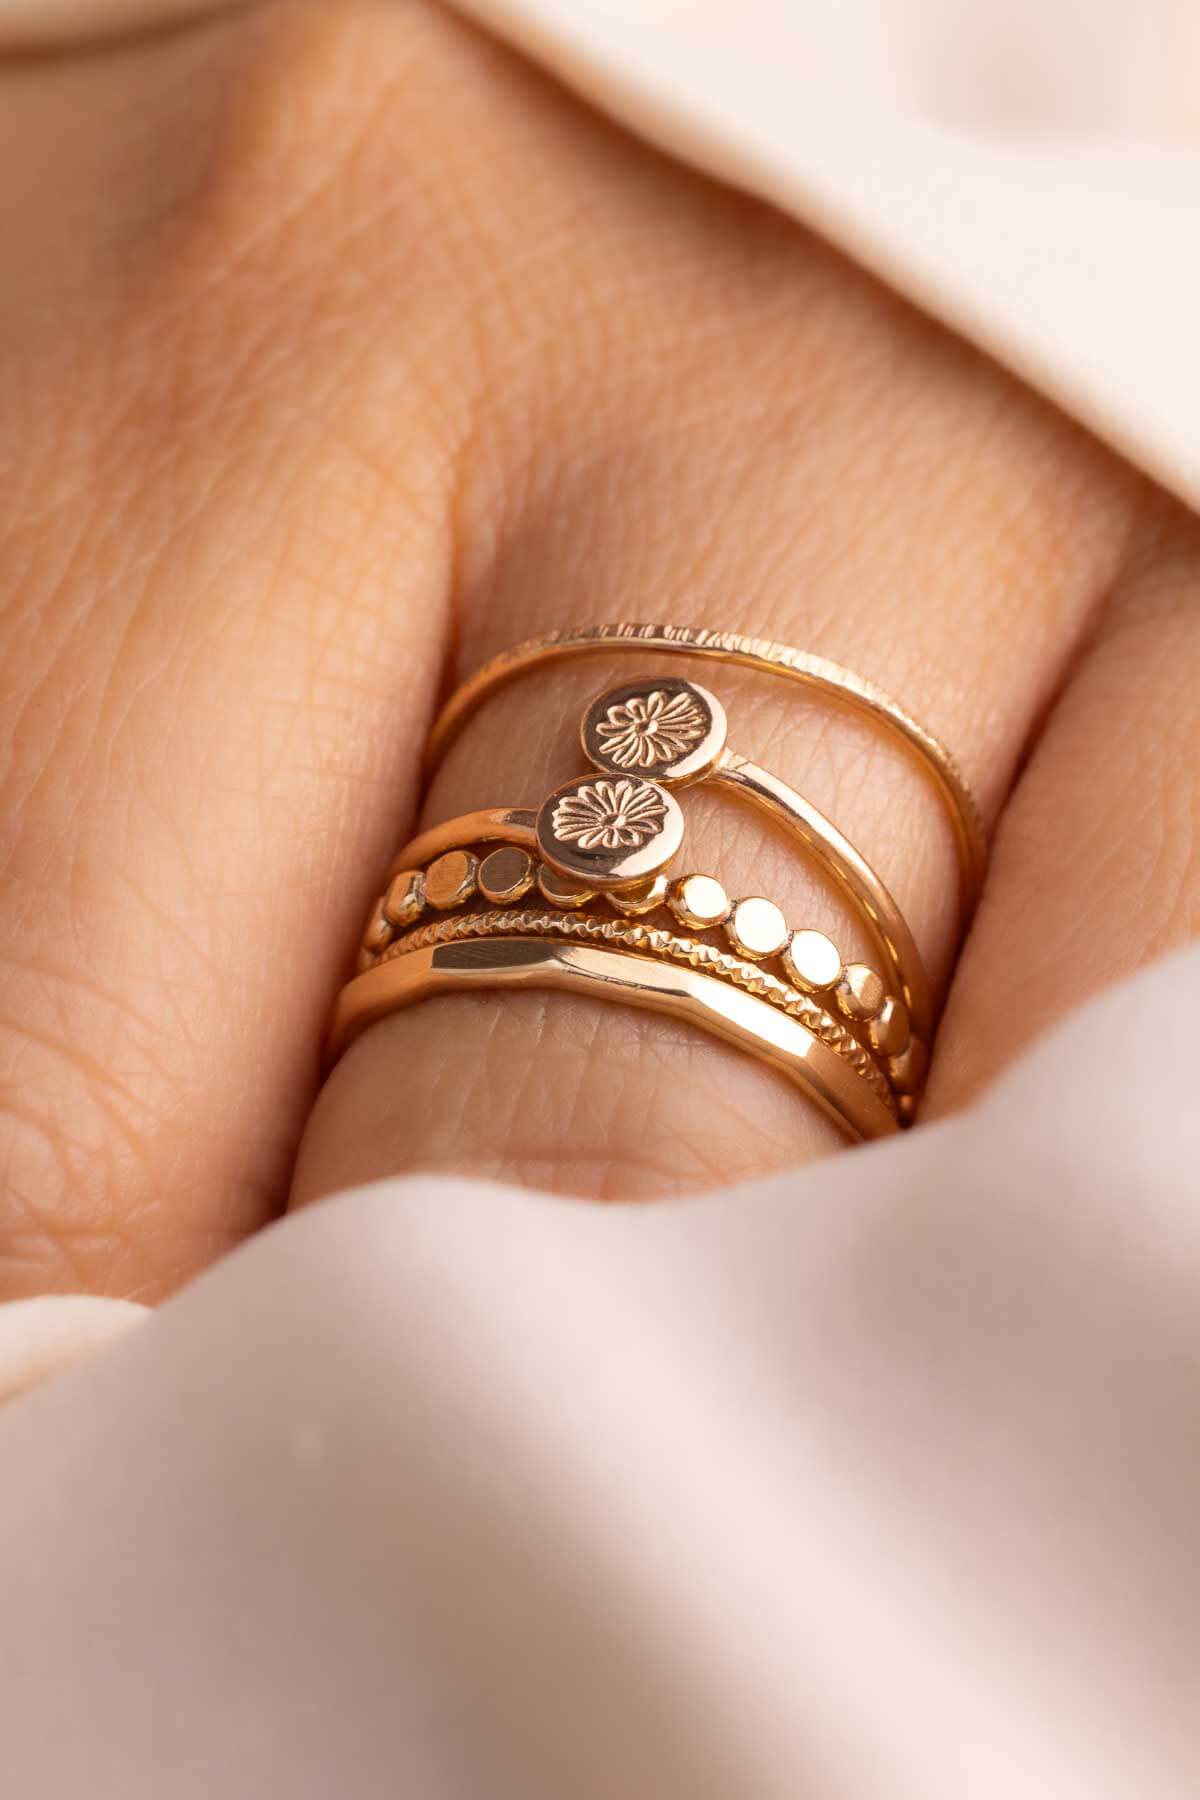 Gold rings layered stacked